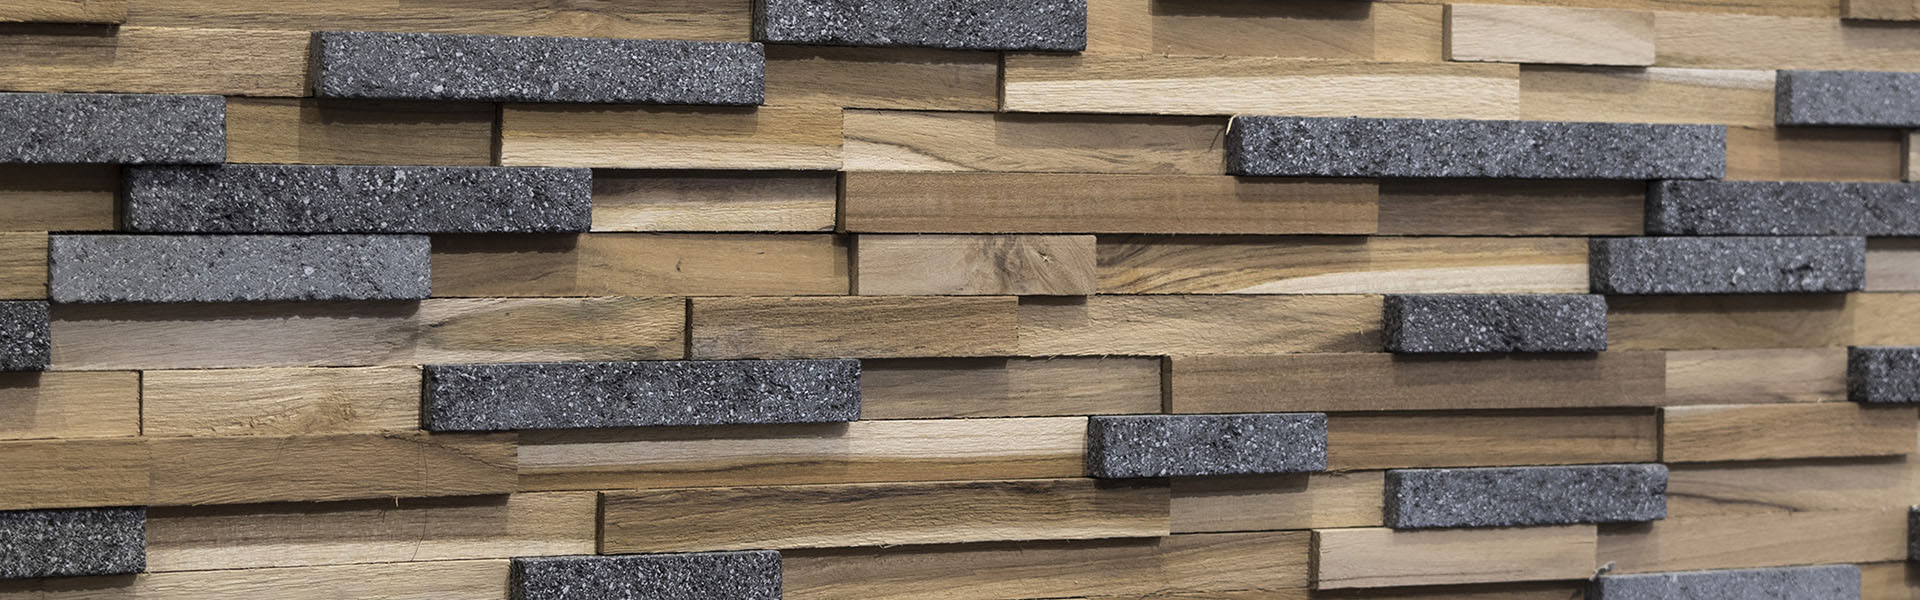 Lava Stone and Teak Wooden Wall Cladding